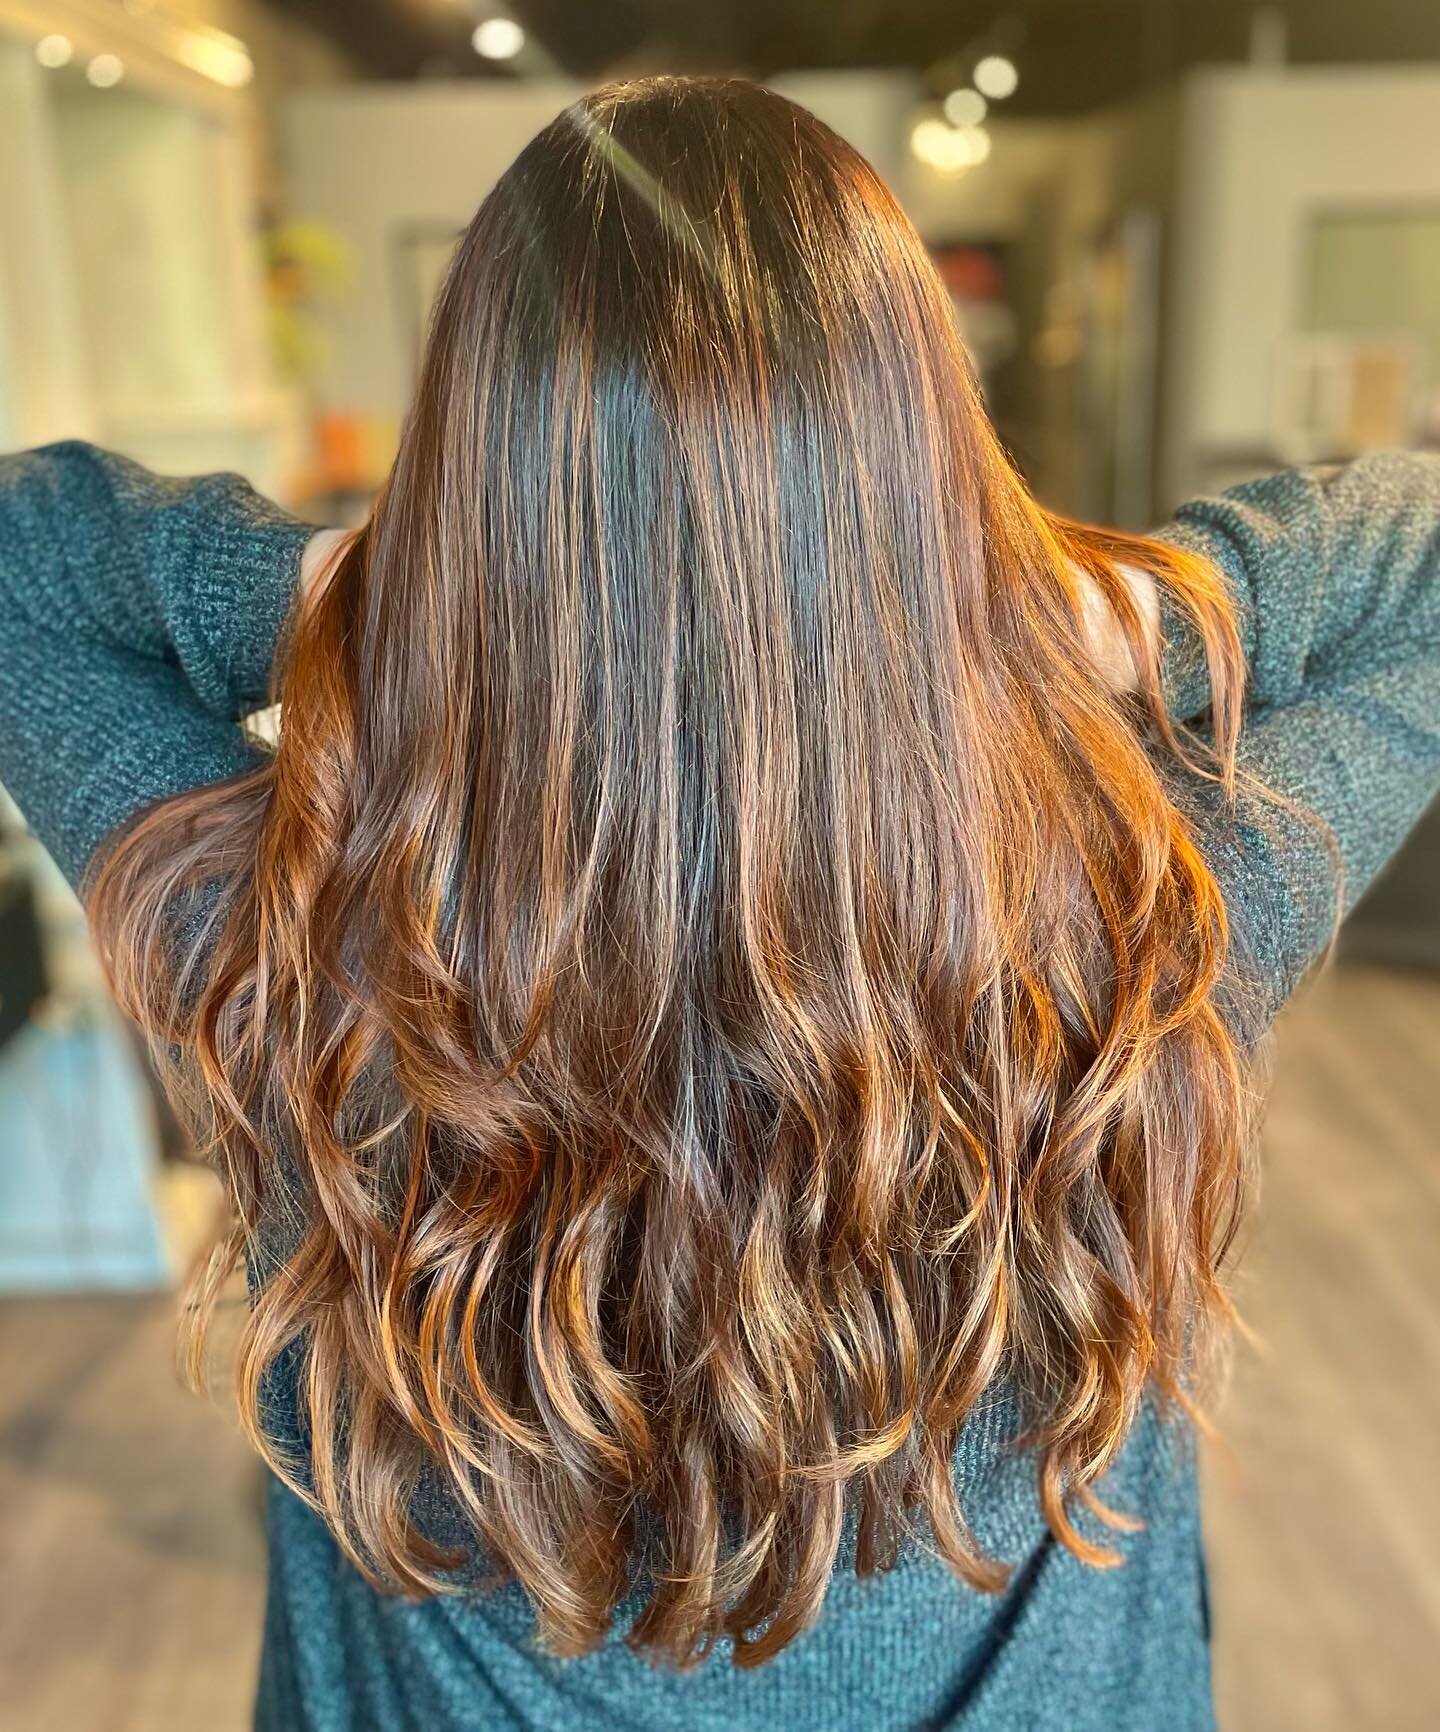 Copper brunette dimensions by @d.raineged.hair thanks for visiting us Dawn. We love having new guests in our chair